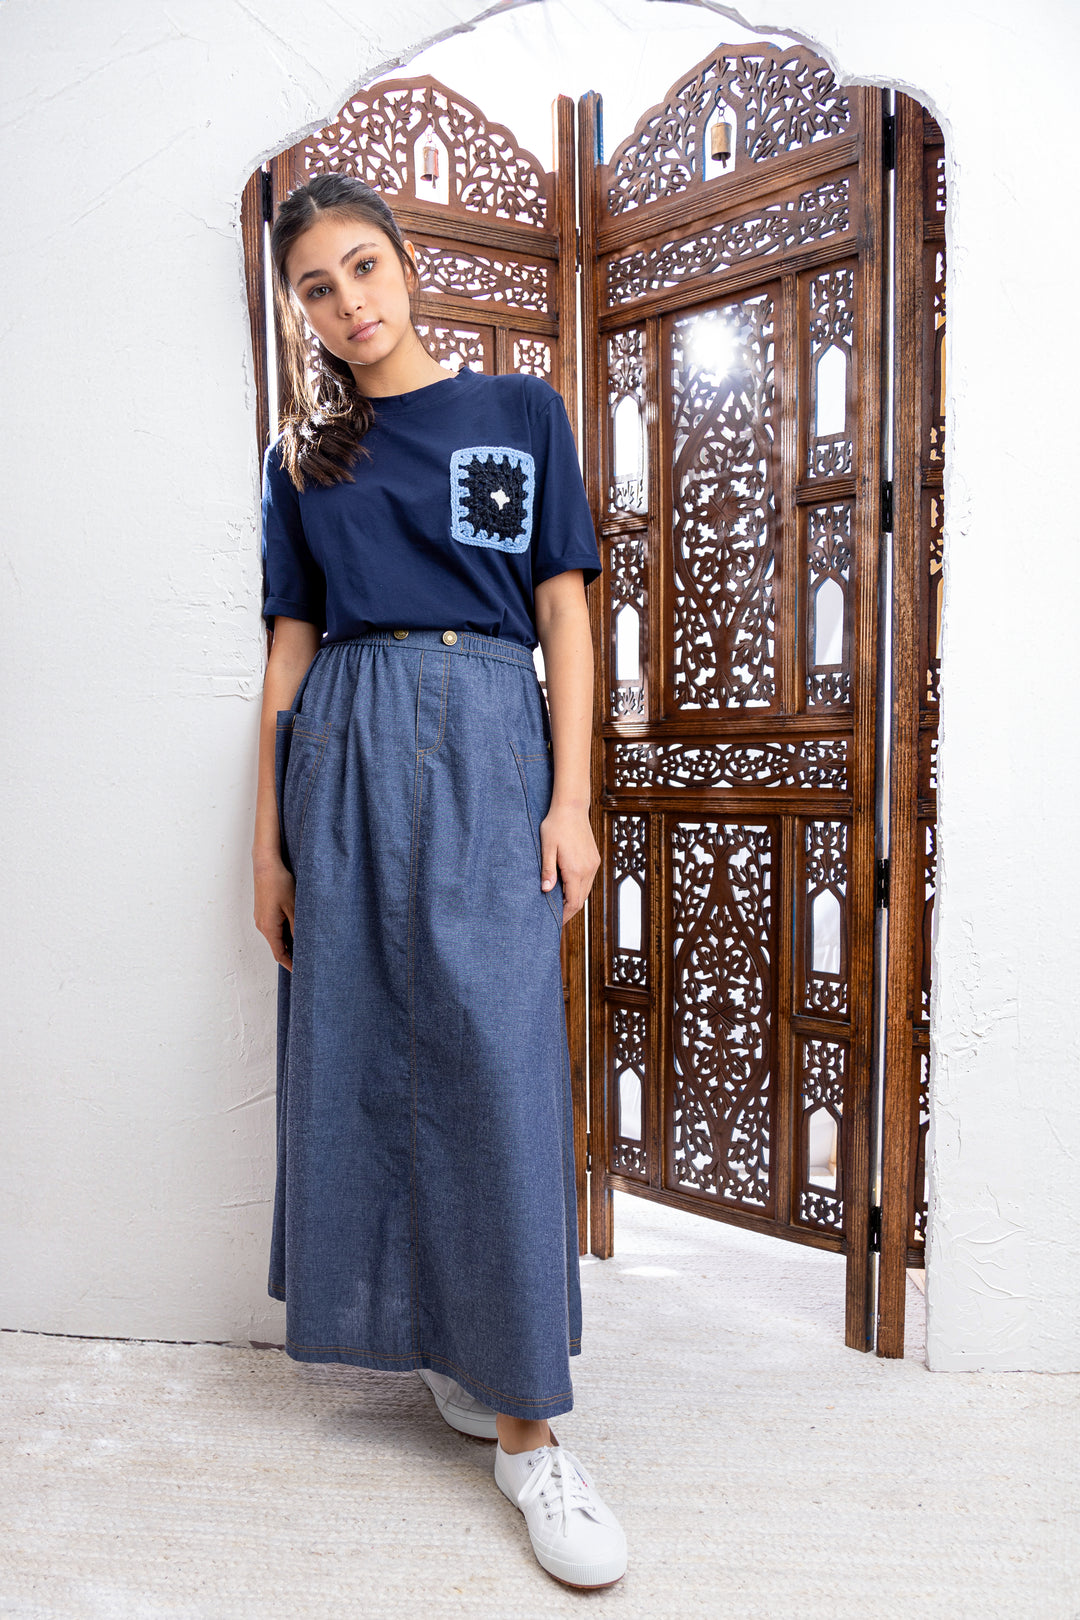 HSK142-DOUBLE STITCH DETAIL SKIRT-Chambray Blue